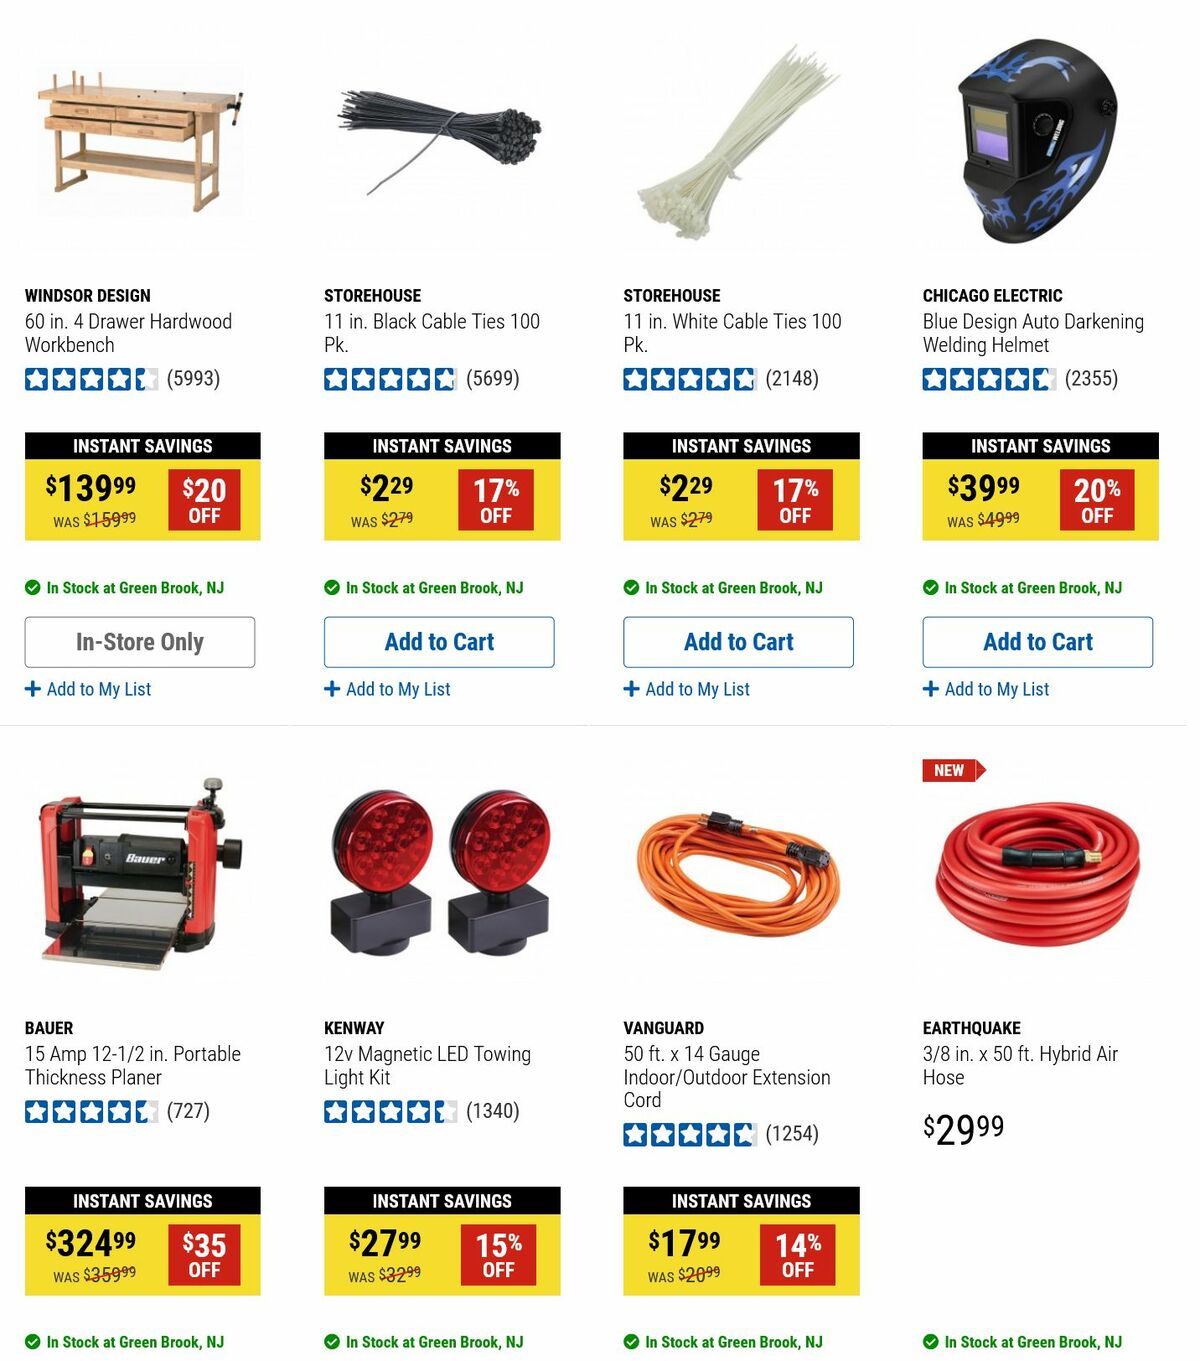 Harbor Freight Tools Weekly Ad from August 6